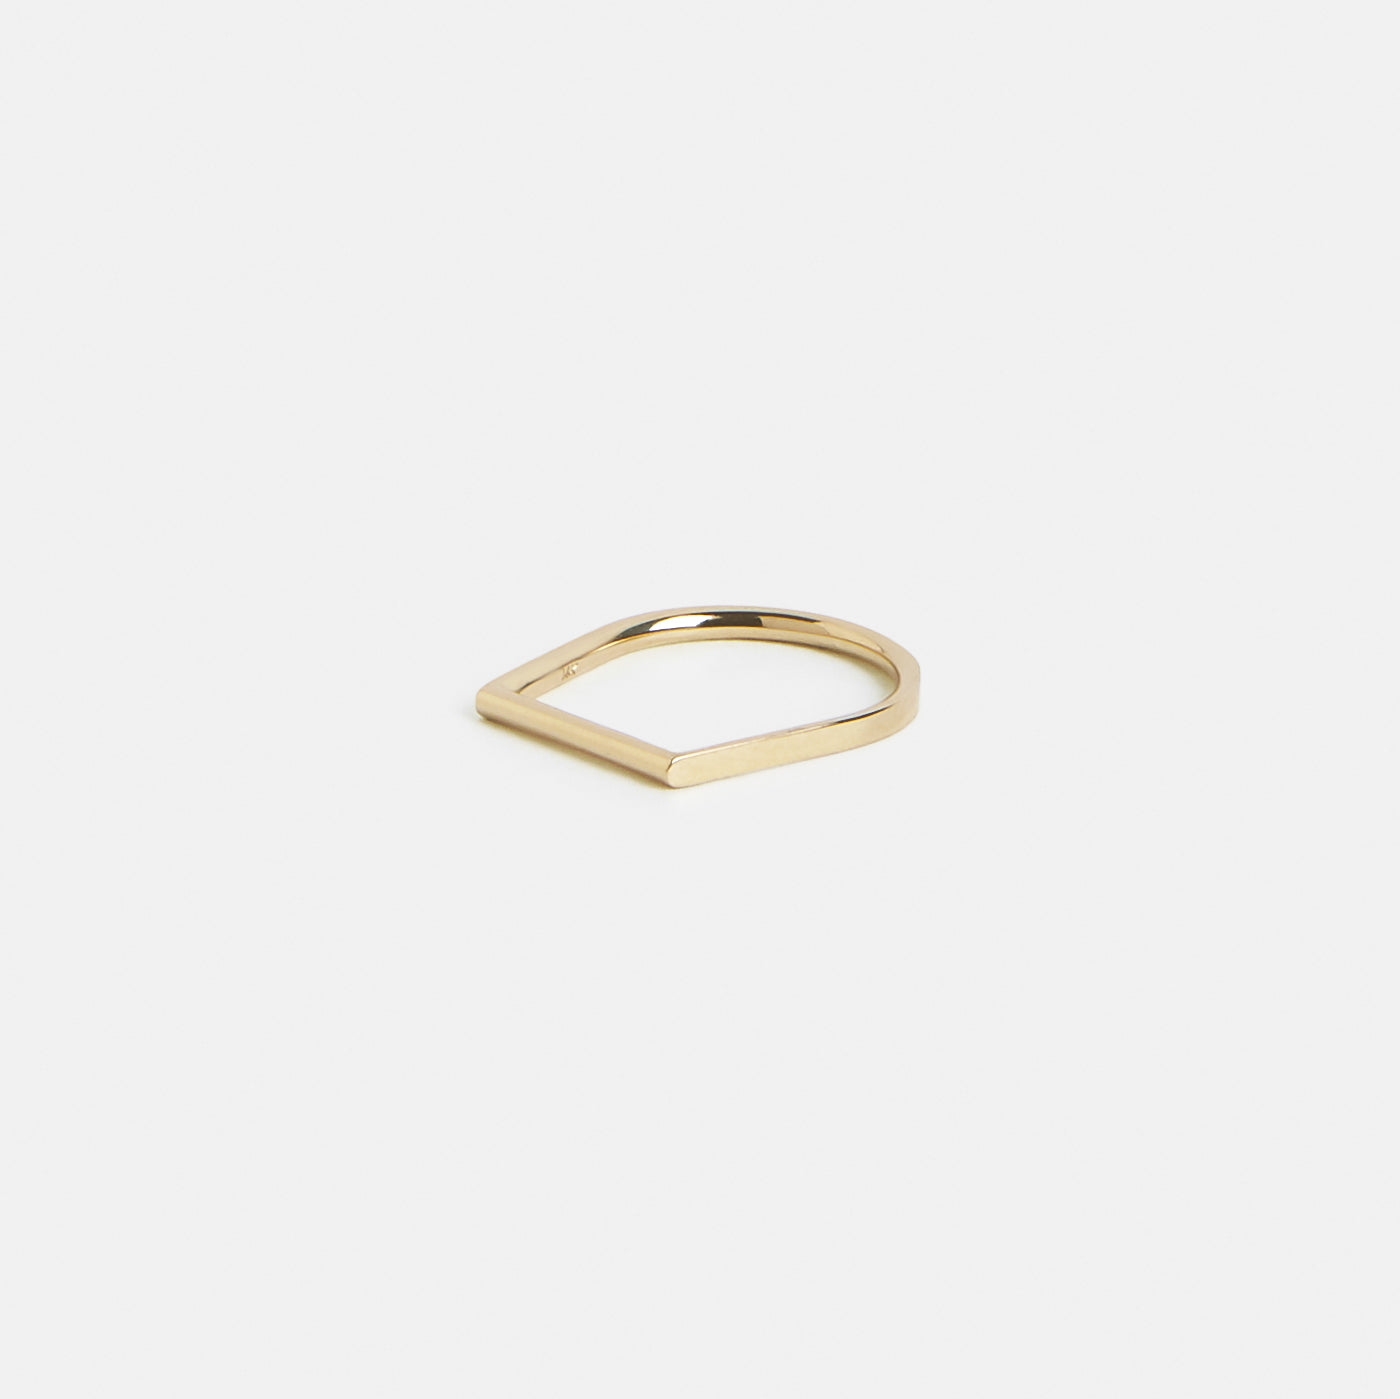 Lina Alternative Ring in 14k Gold By SHW Fine Jewelry NYC